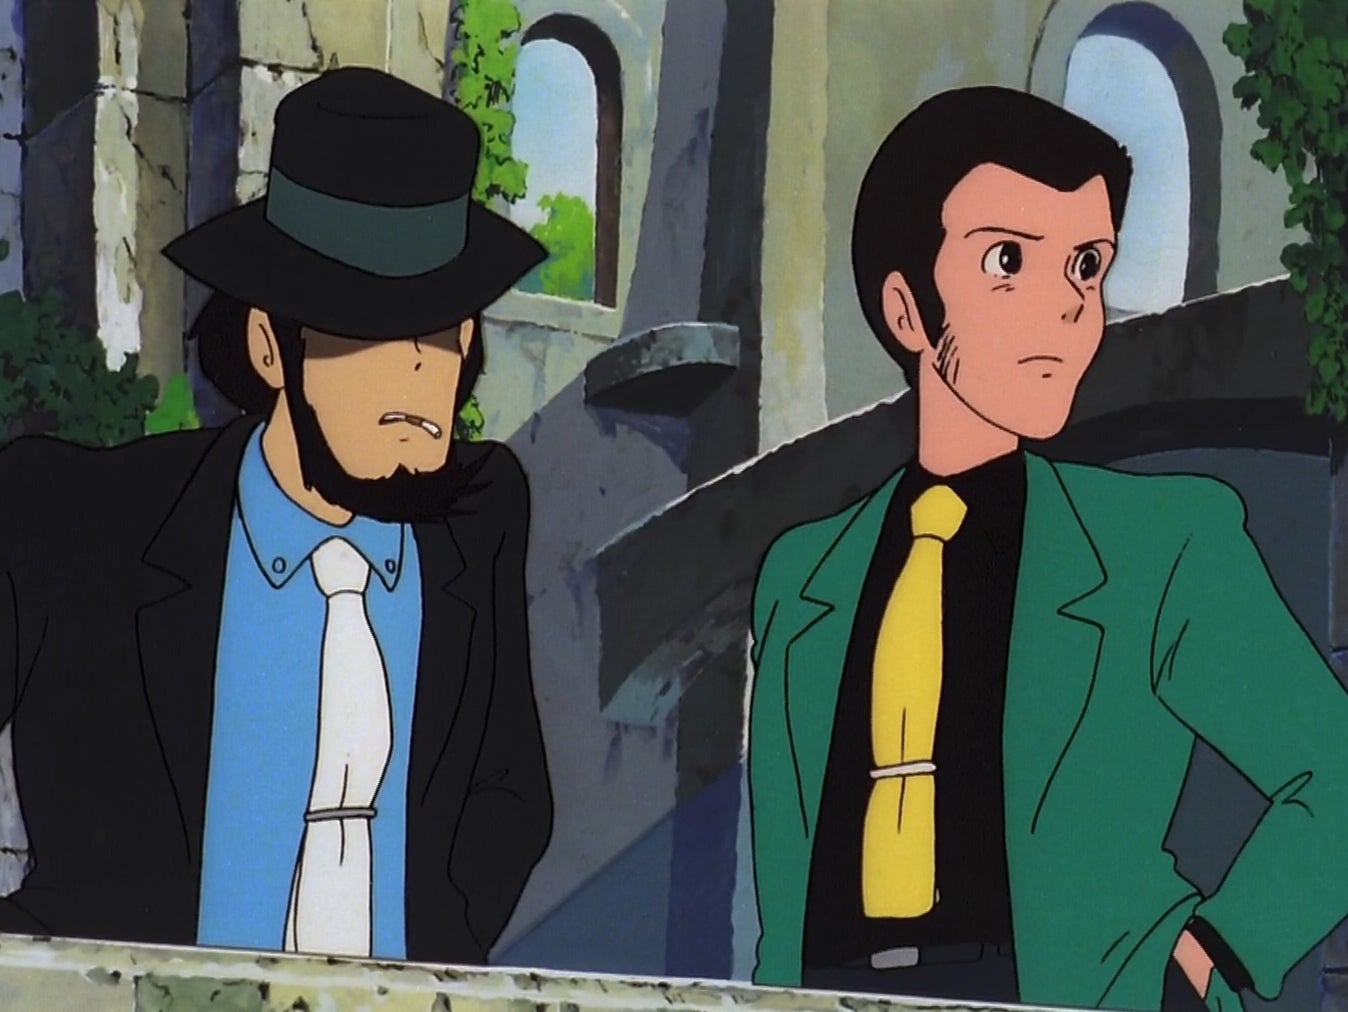 ‘Lupin III: The Castle Of Cagliostro’ is leaving Netflix